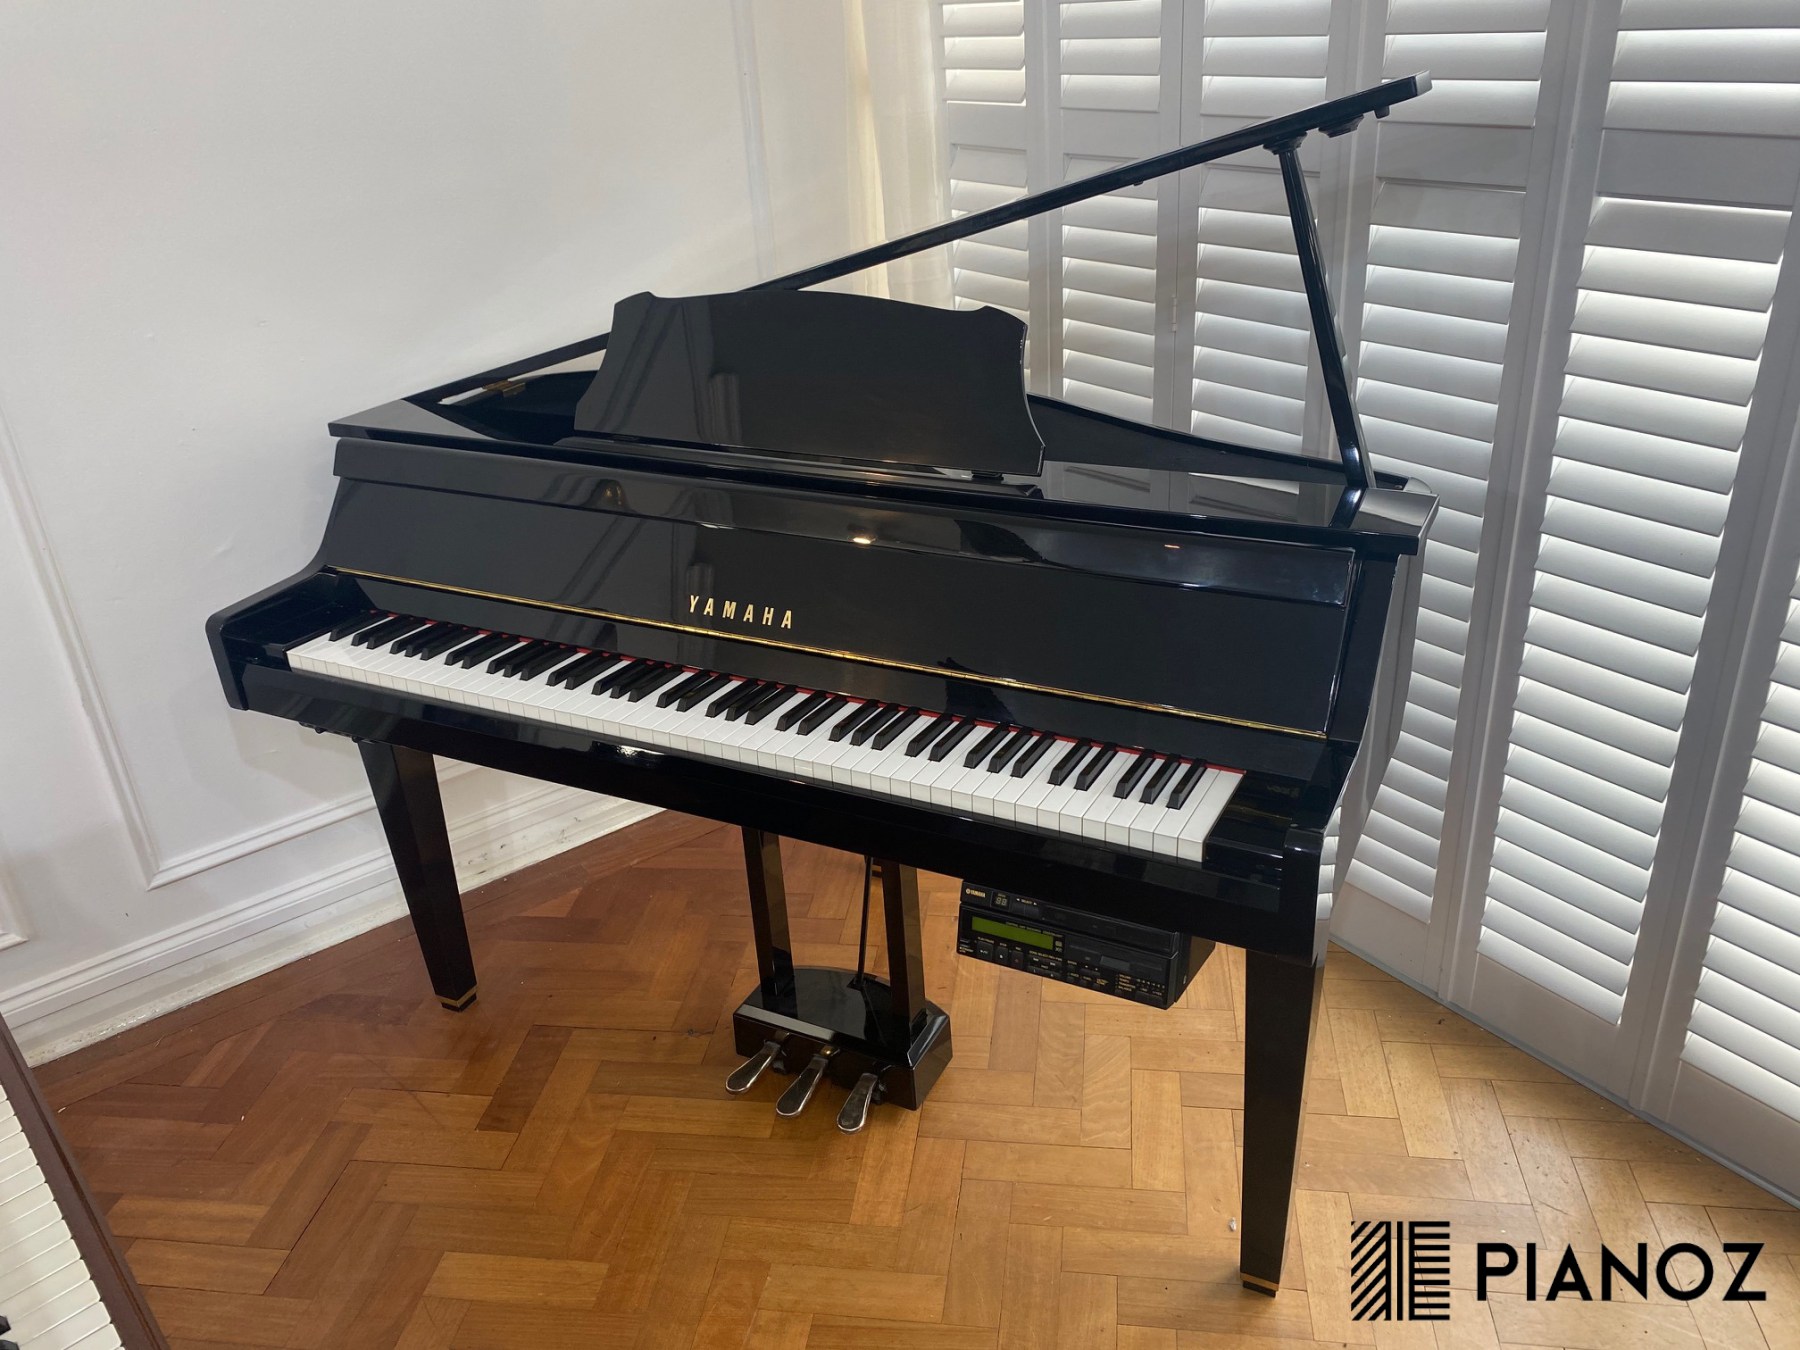 Yamaha Self Playing Disklavier Baby Grand Piano piano for sale in UK